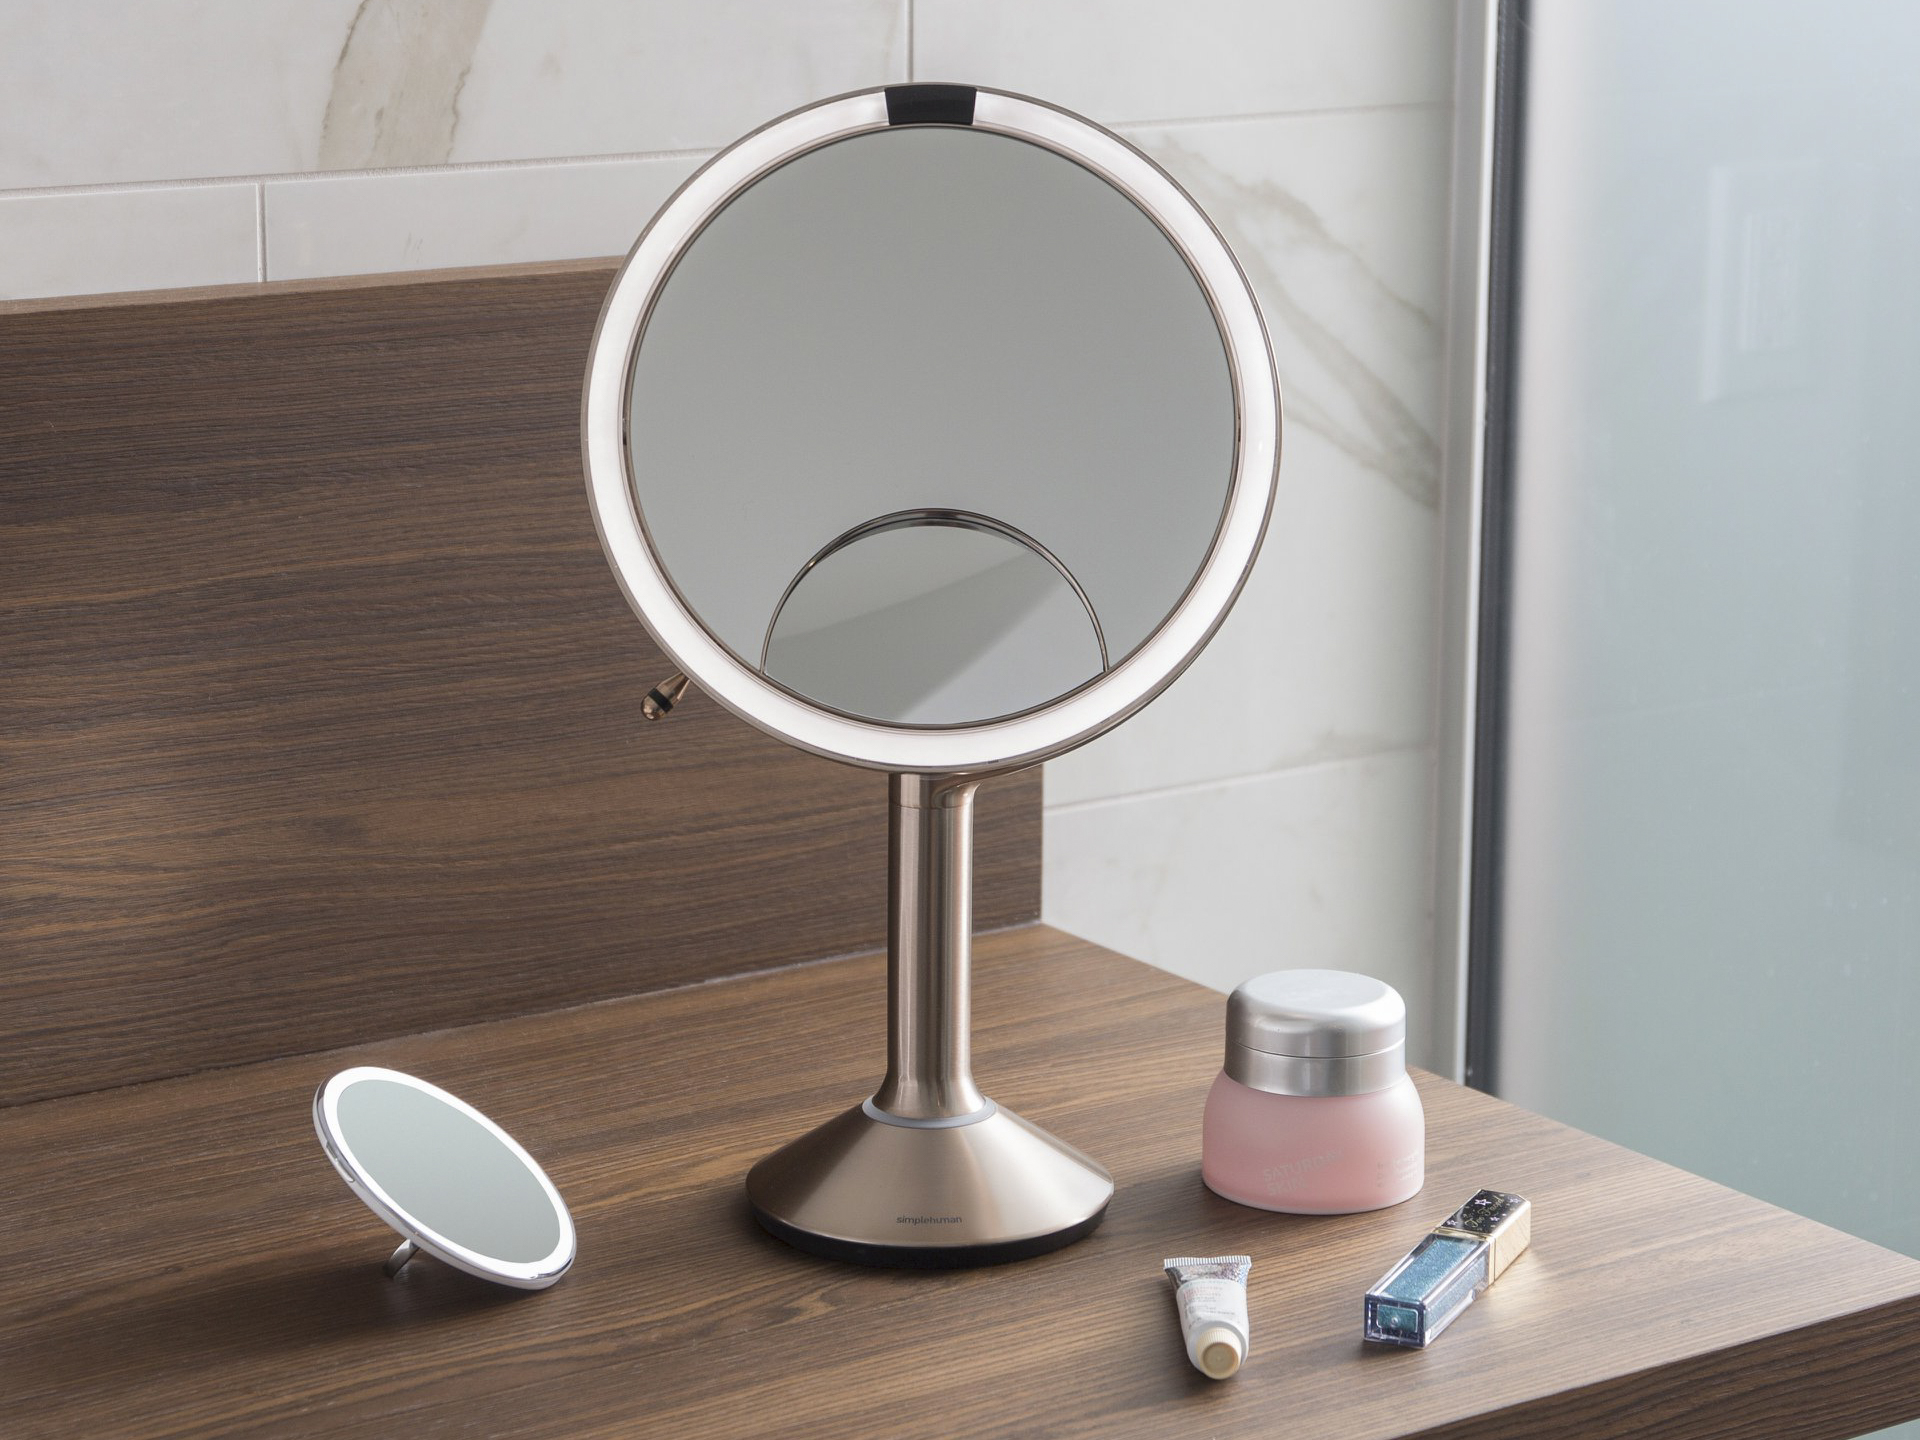 Simplehuman Sensor Mirror - Review - The Only Mirror You Need